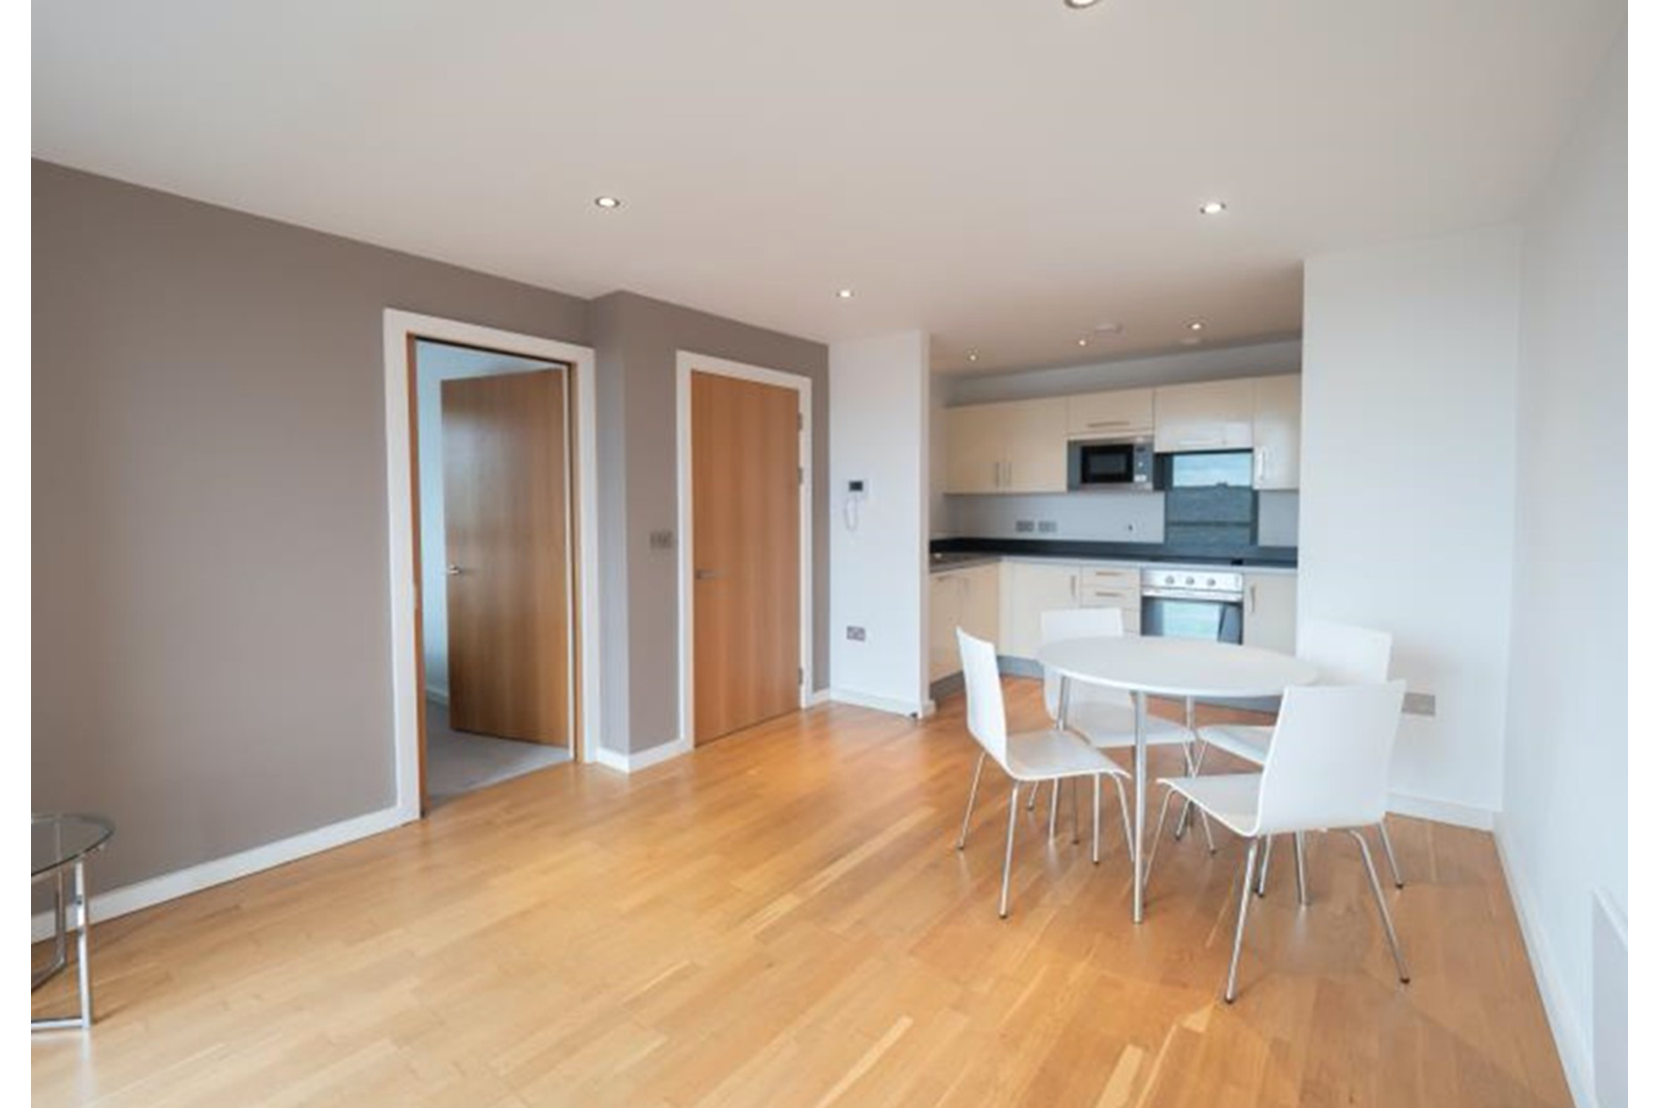 Apartments to Rent by Northern Group at Flint Glass Wharf, Manchester, M4, living kitchen dining area